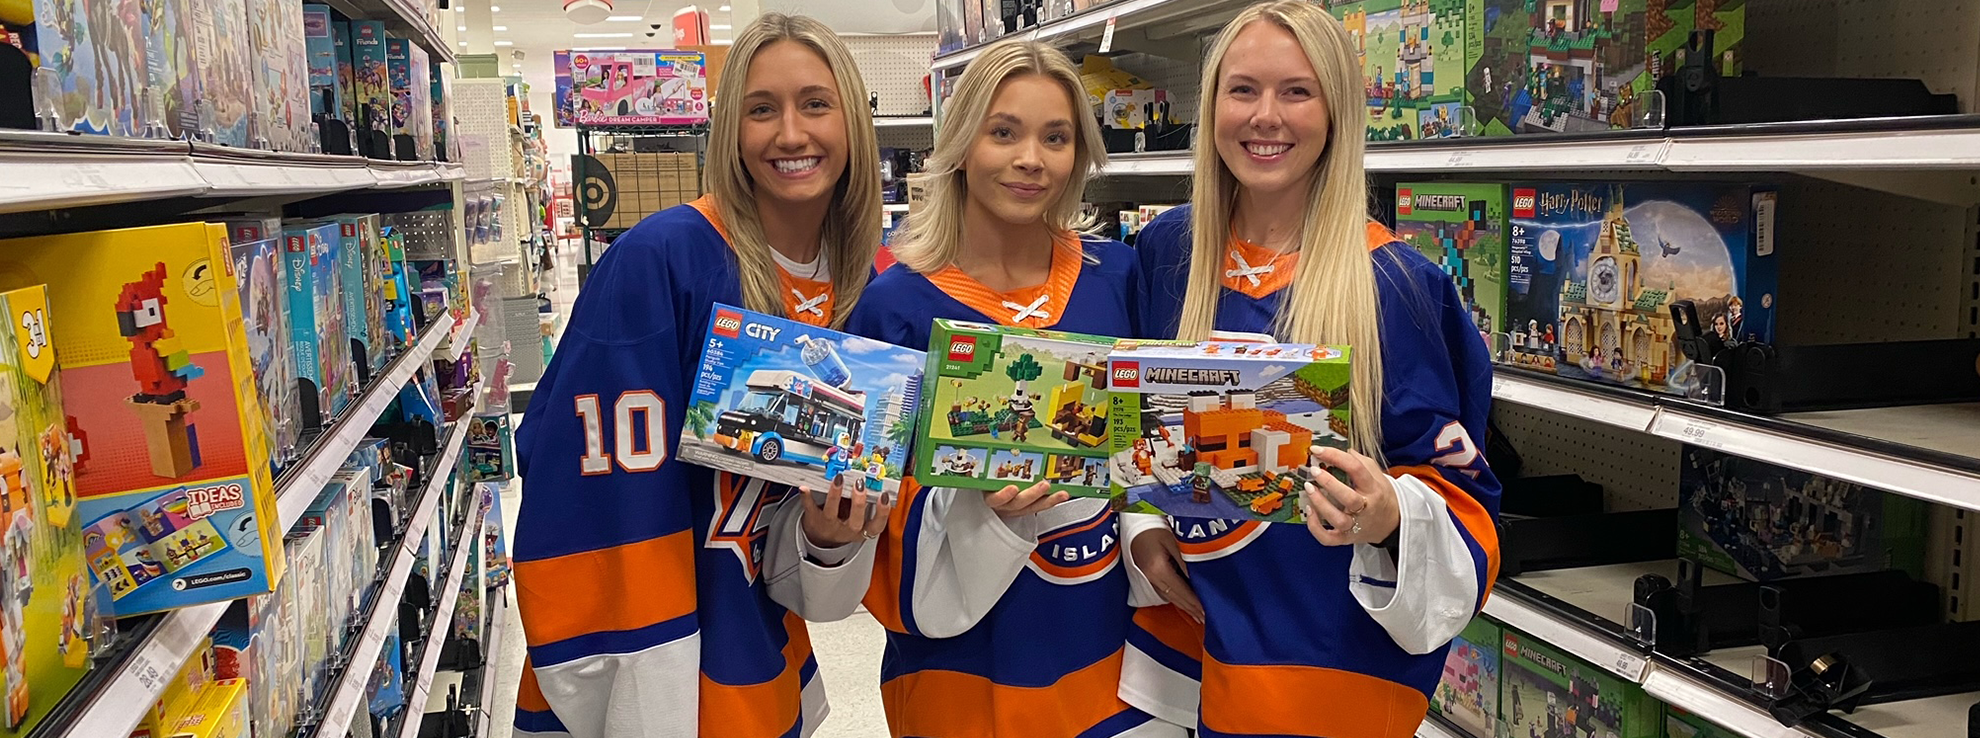 Isles' Wives and Girlfriends Shop for a Cause